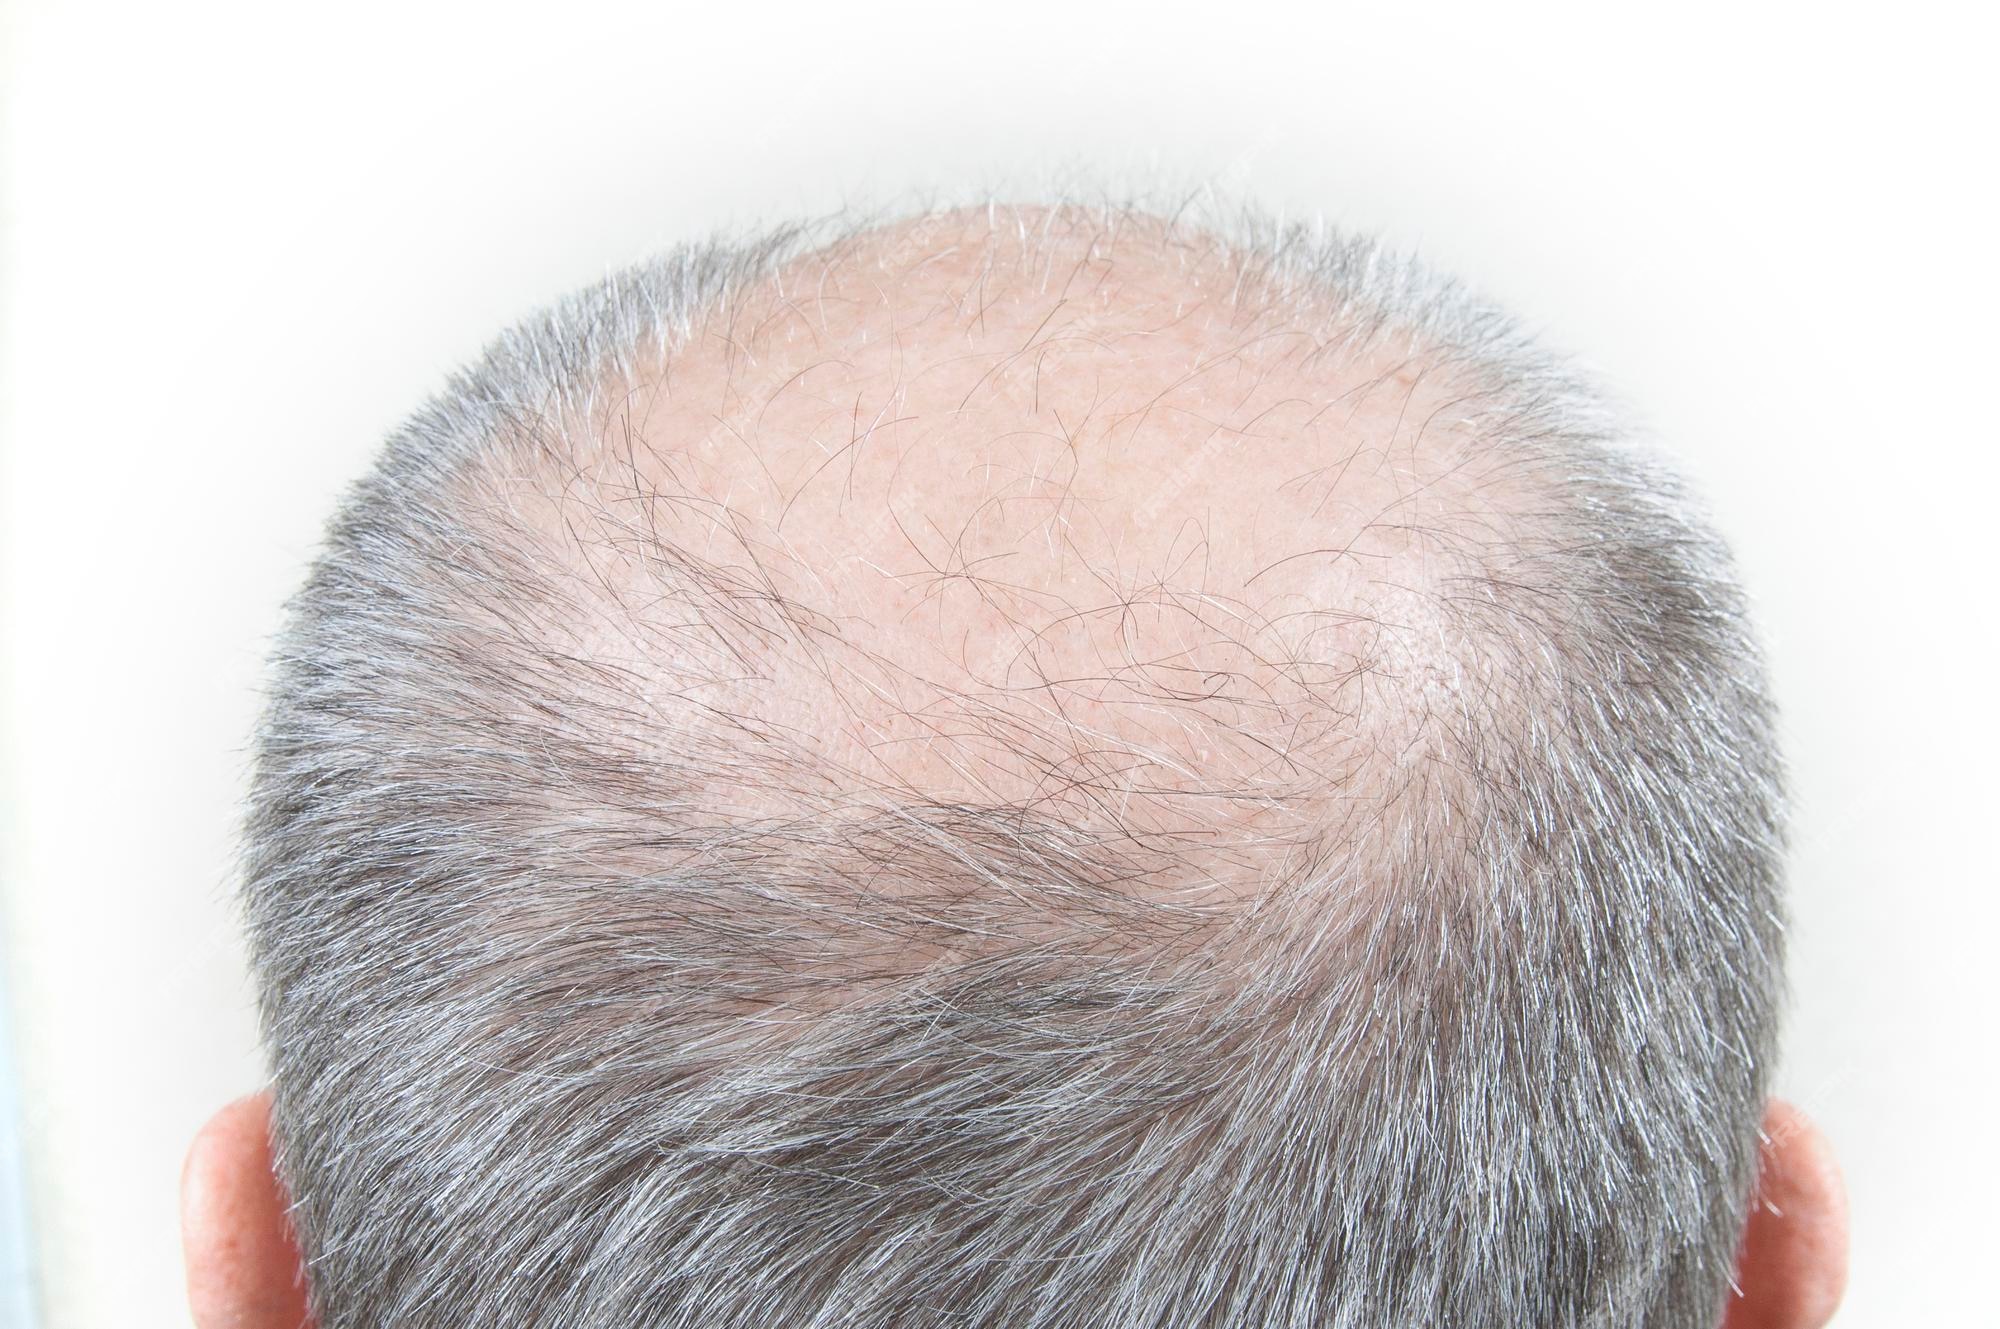 Premium Photo | Bald spot on the head, gray hair, close-up view from  behind, the problem of hair loss.